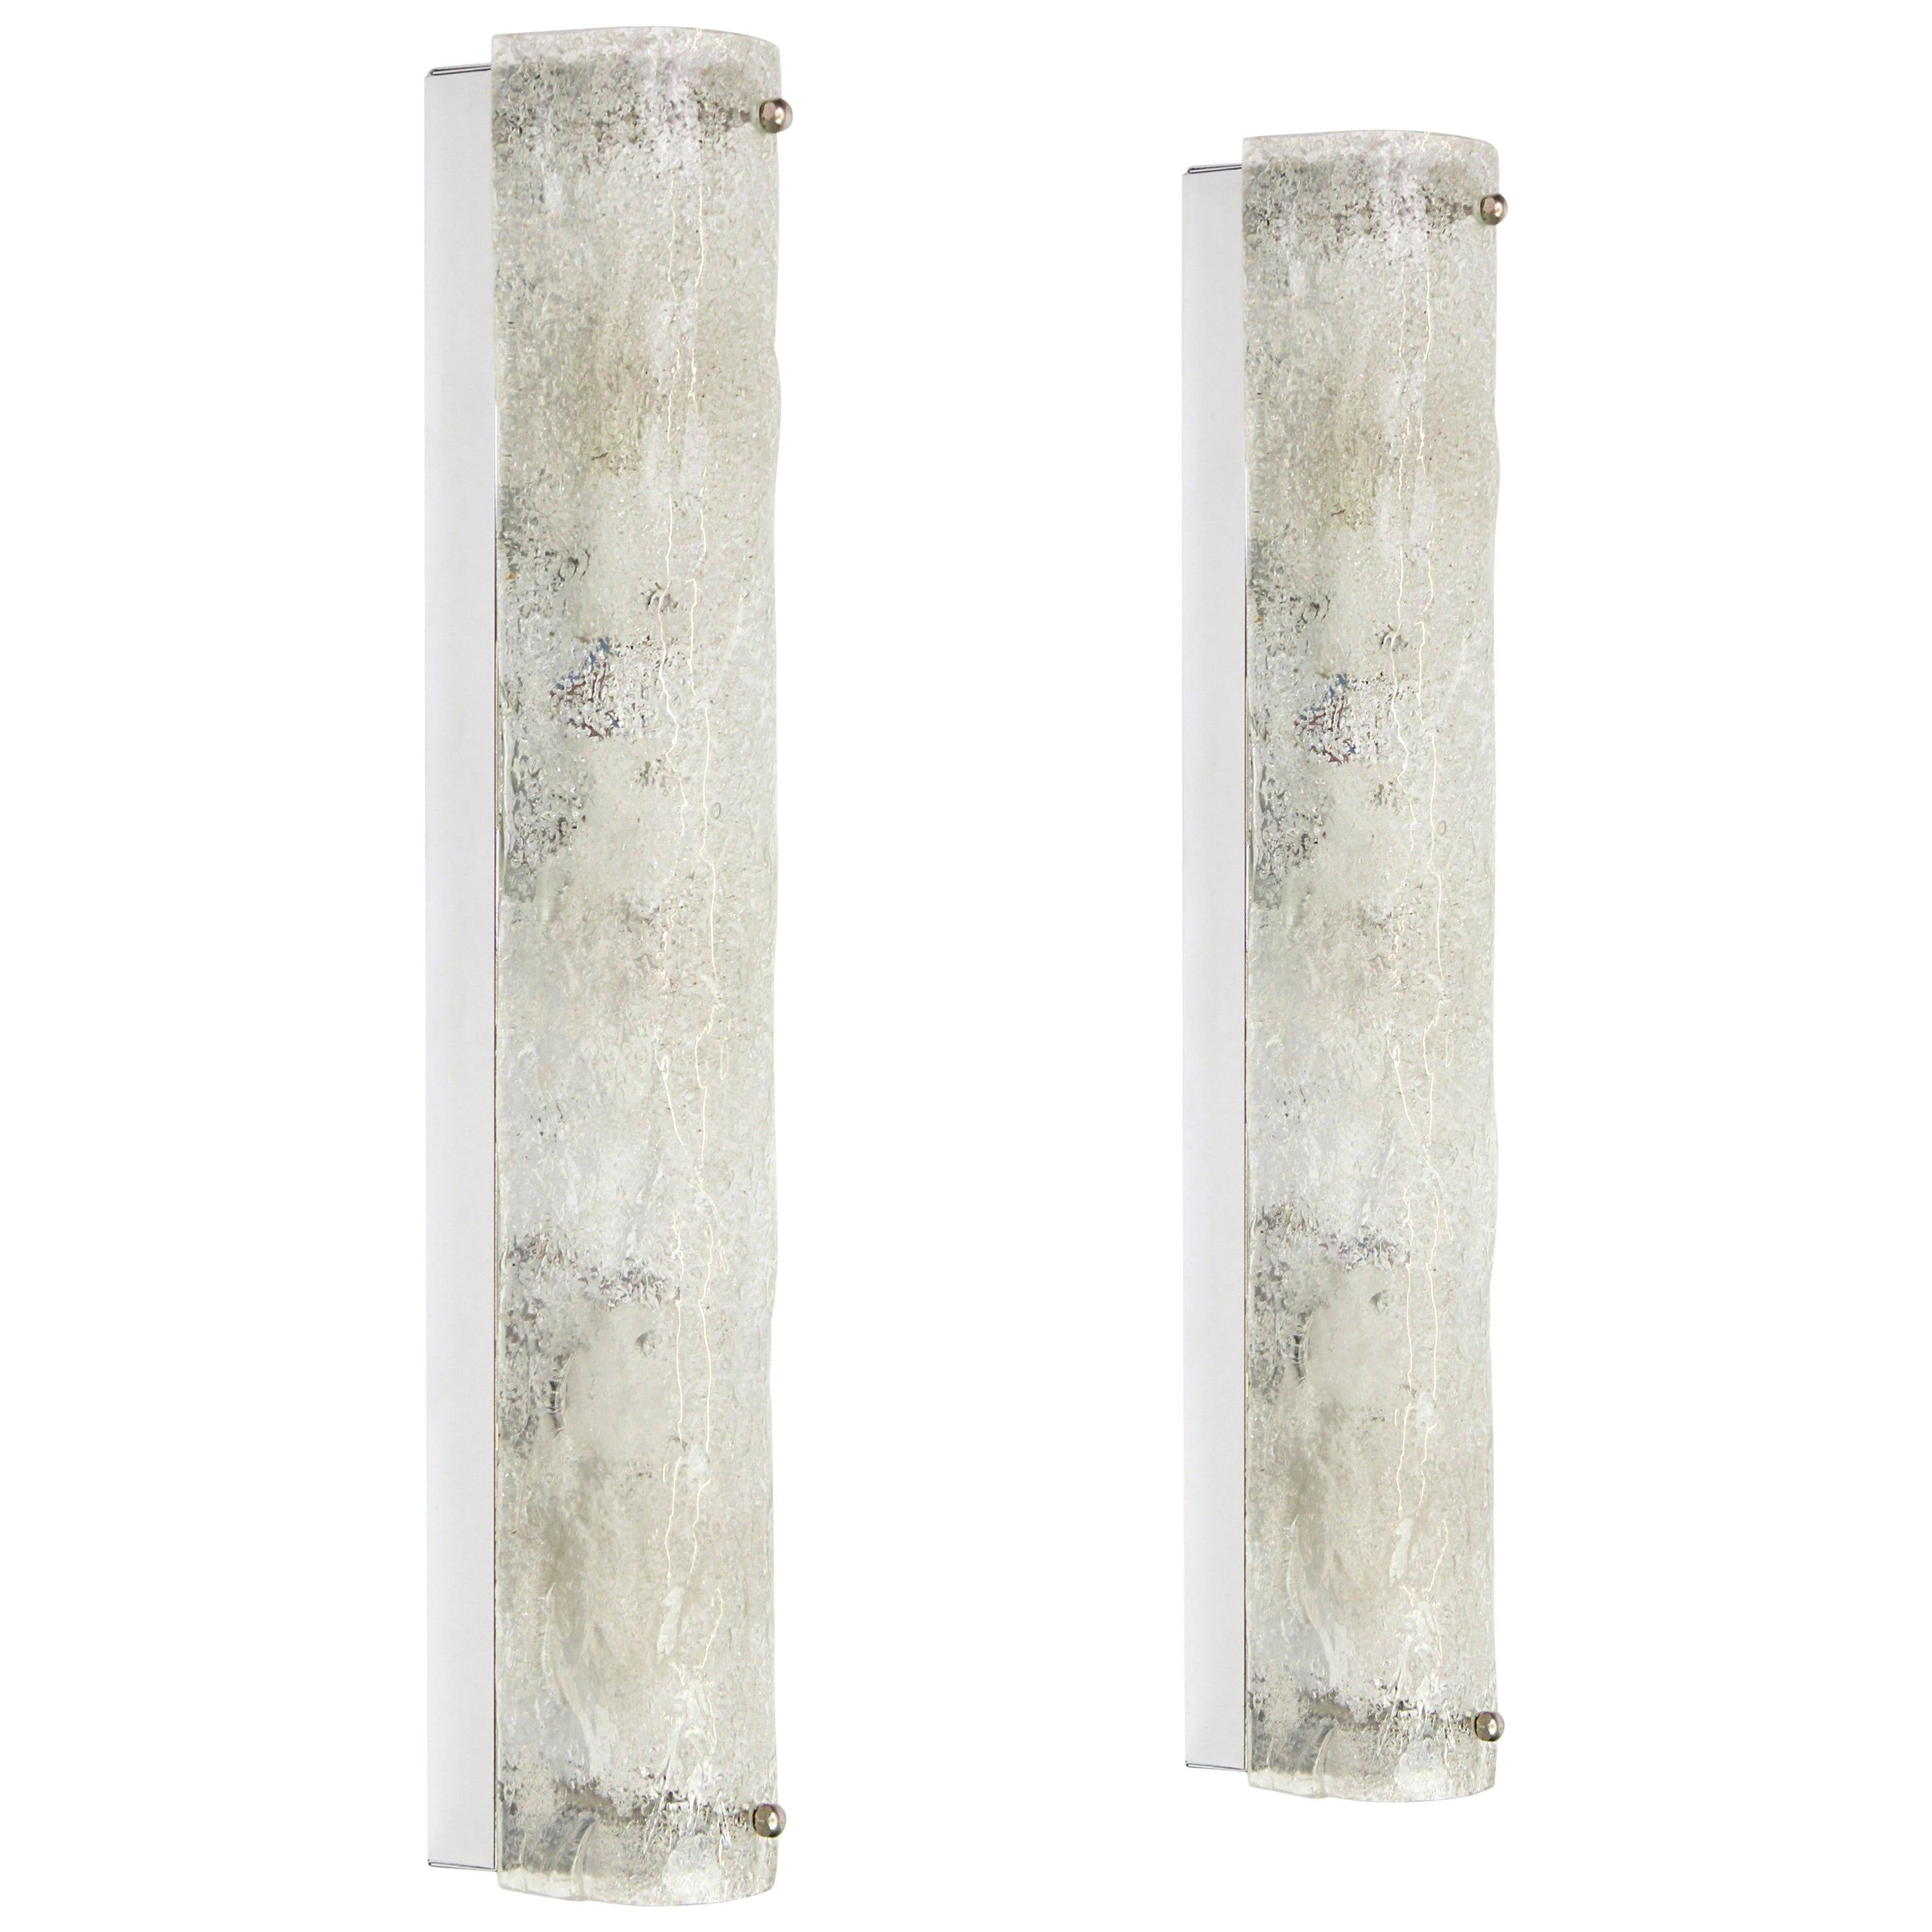 Pair of Large Murano Ice Glass Sconces Modernist Wall Fixtures, Germany, 1960s